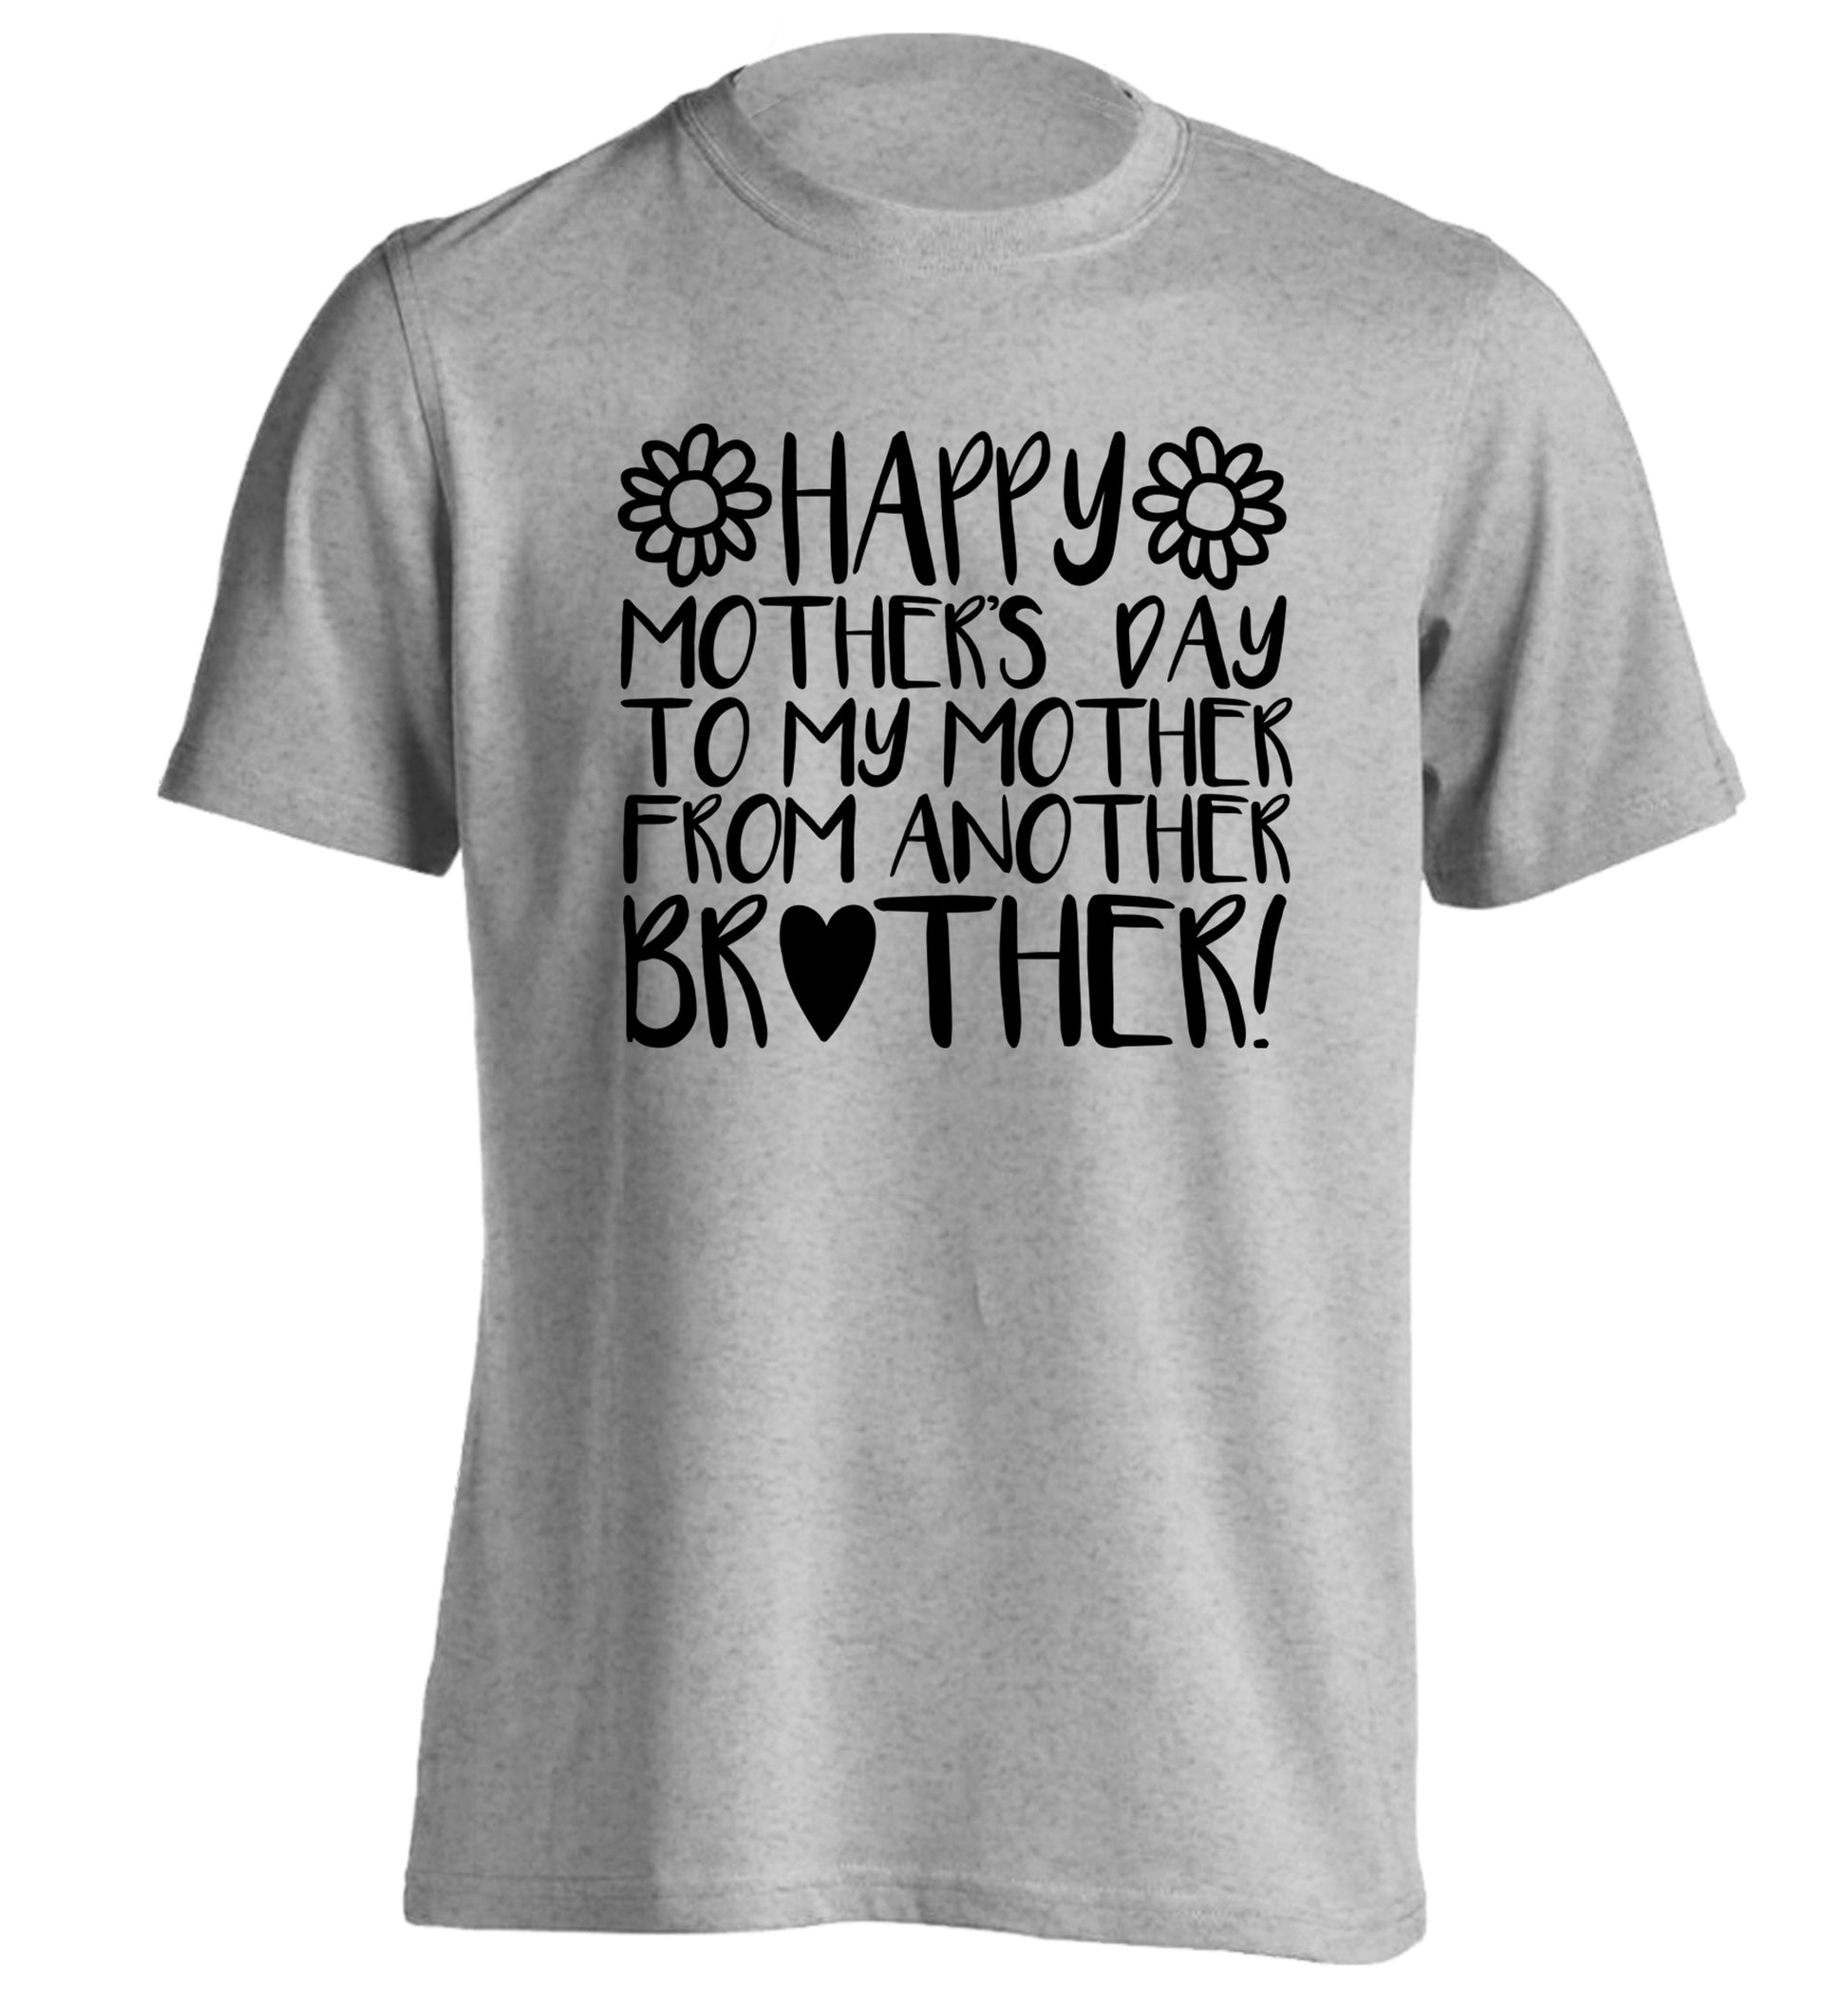 Happy mother's day to my mother from another brother adults unisex grey Tshirt 2XL